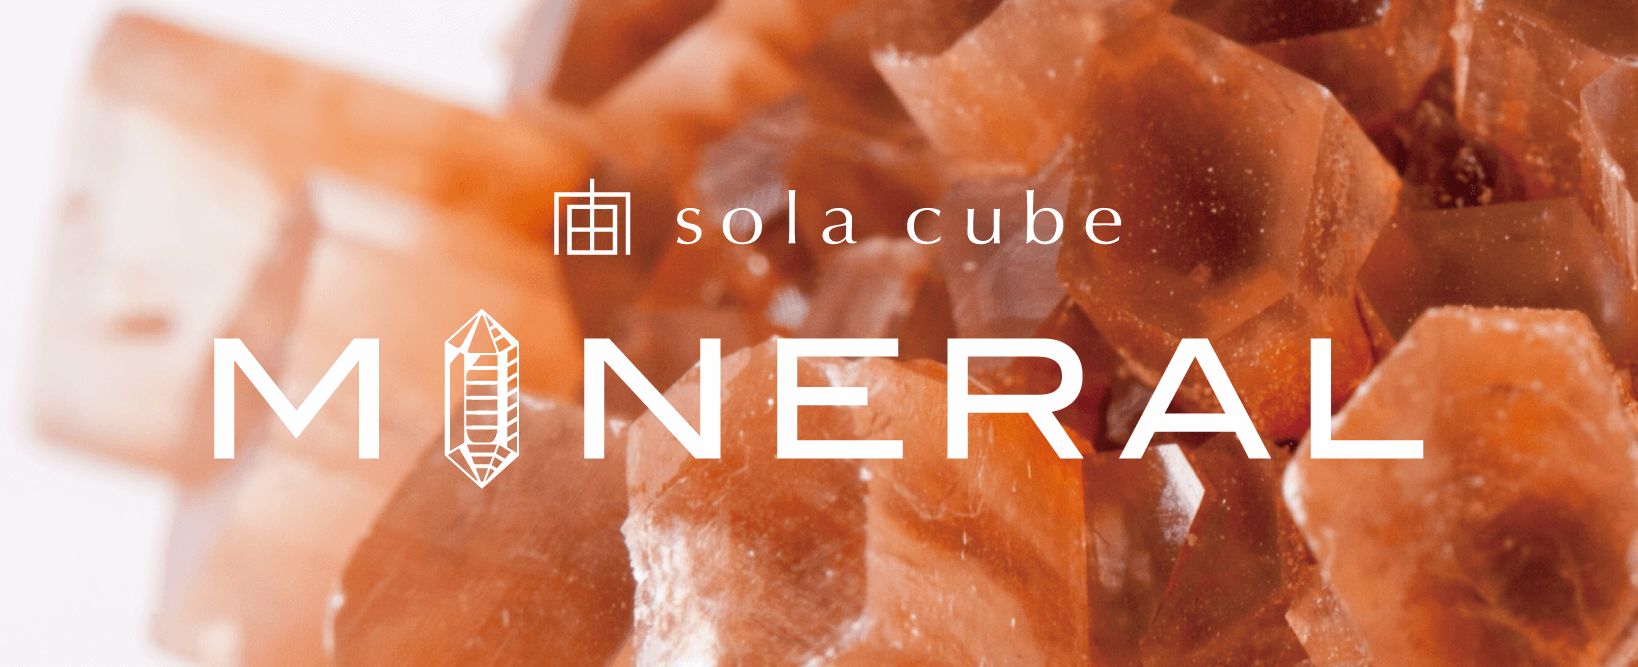 Sola cube Mineral